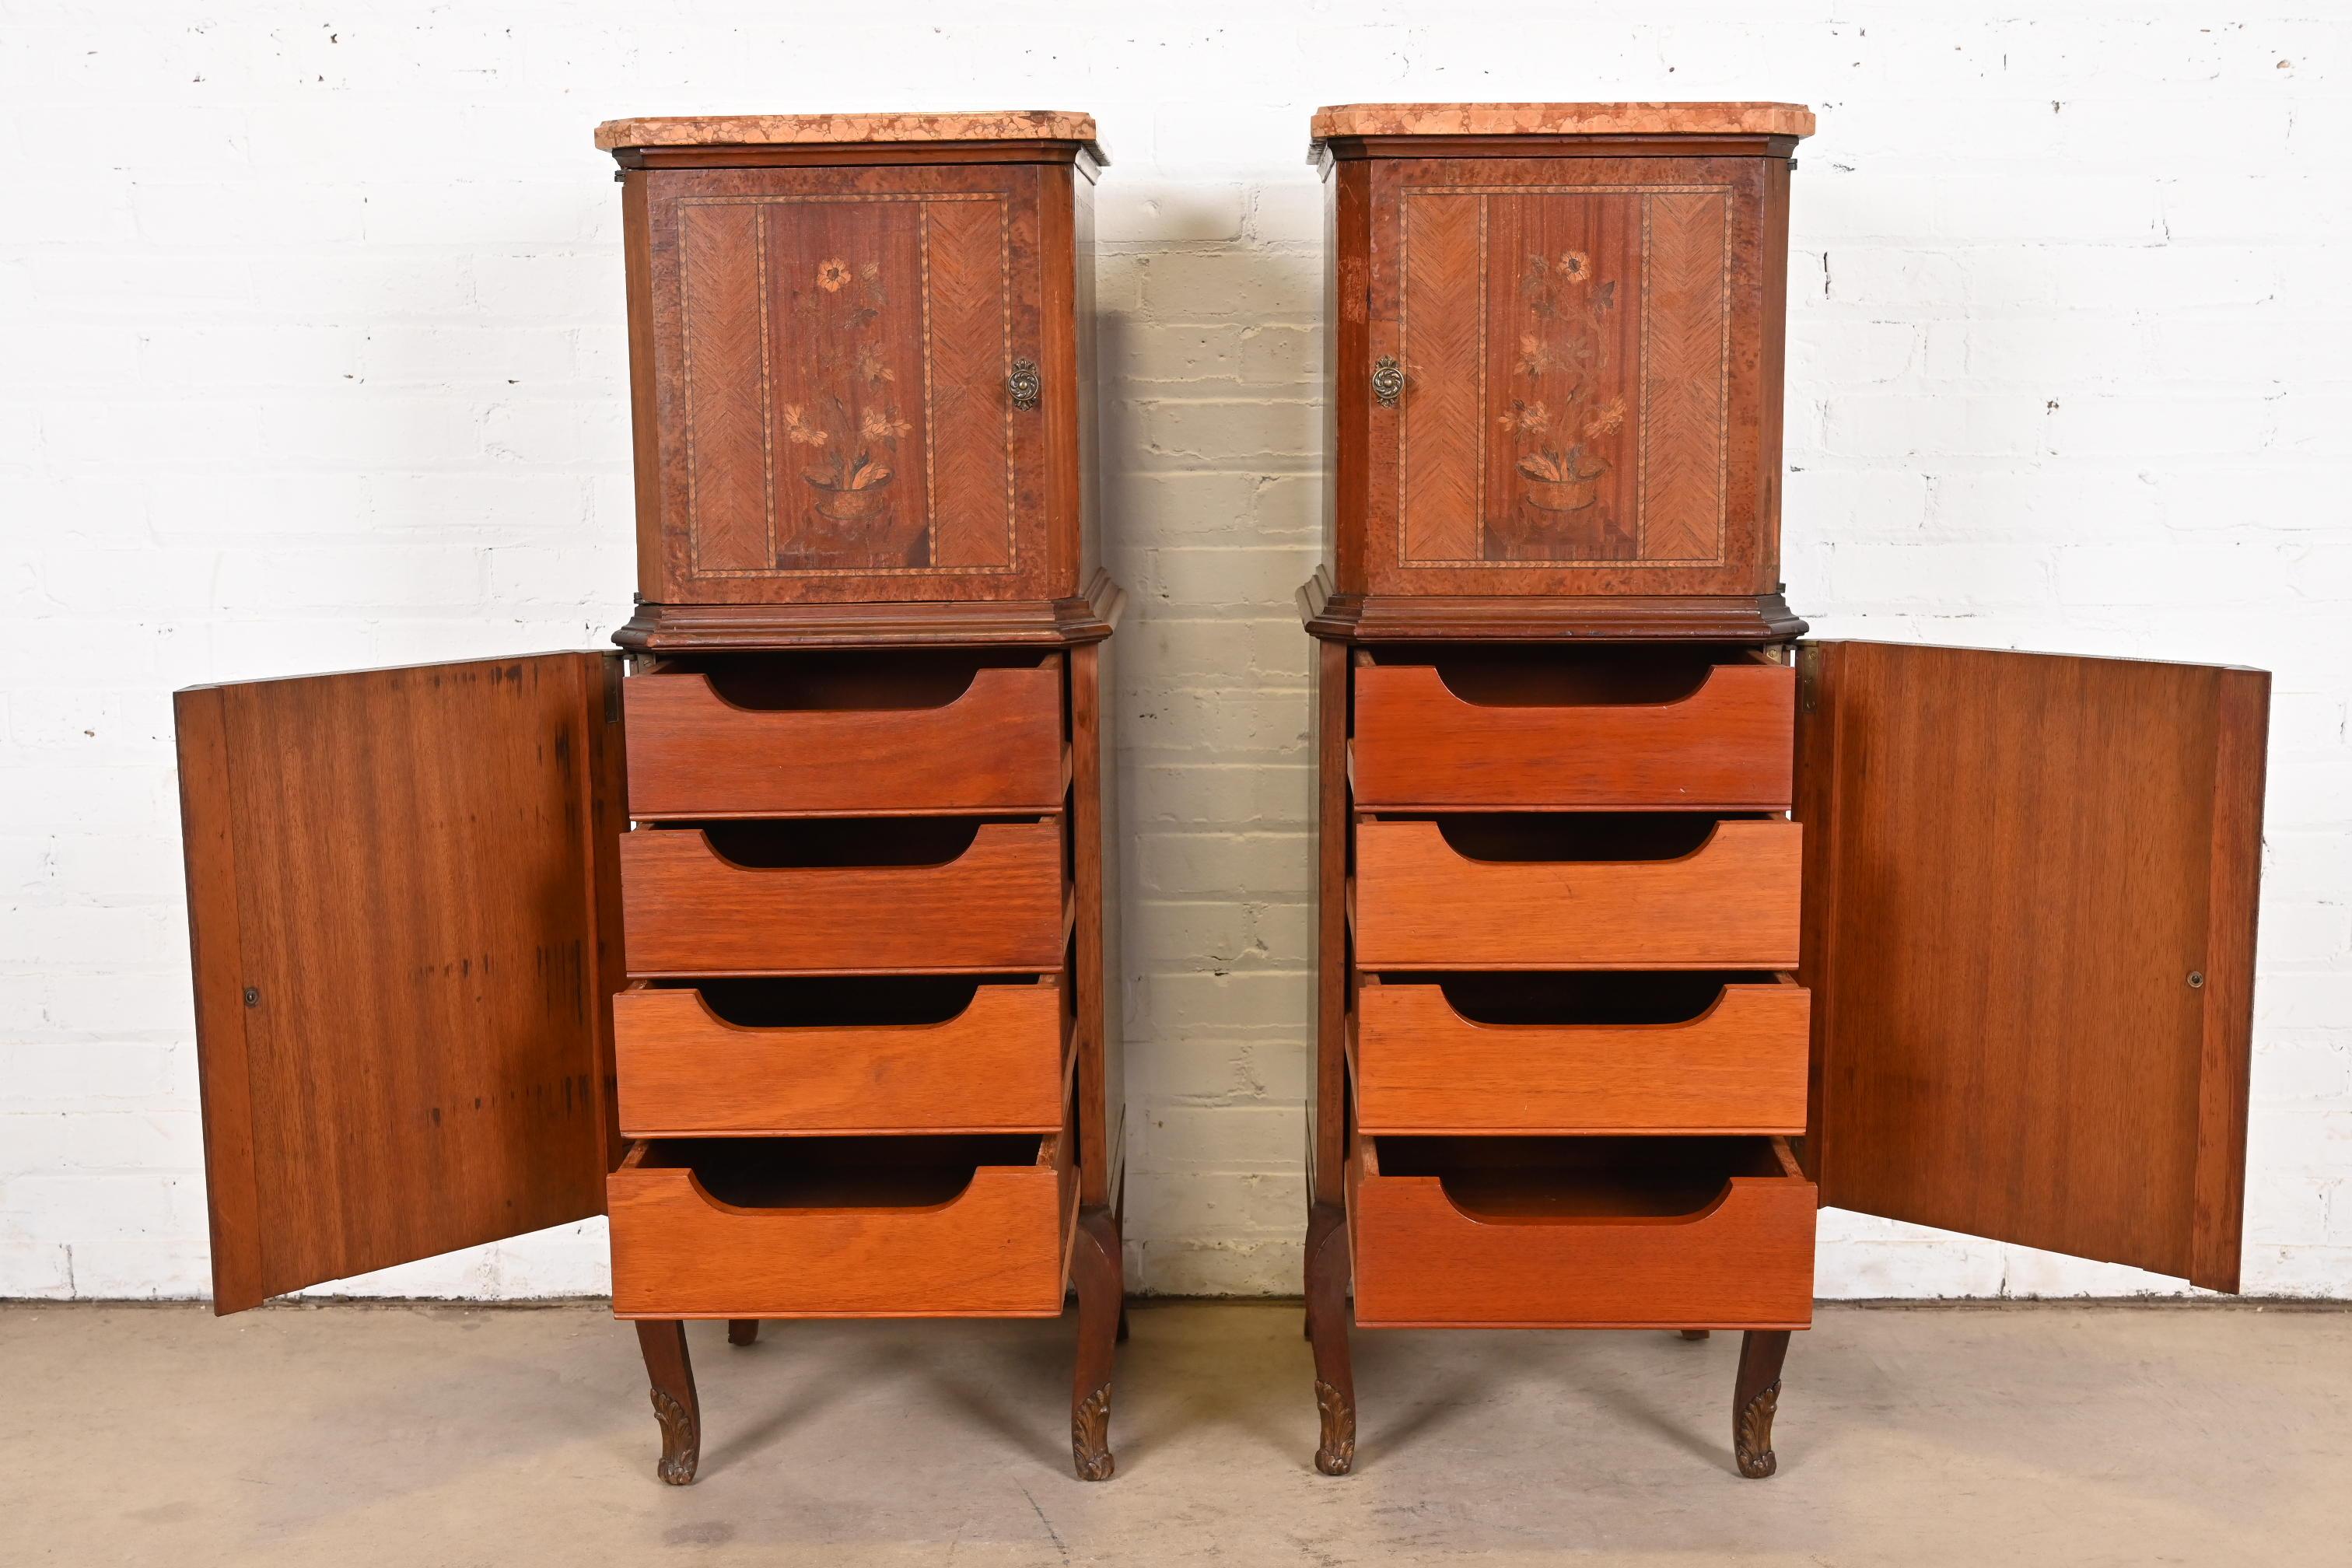 French Louis XV Kingwood Inlaid Marquetry Marble Top Lingerie Chests, Pair For Sale 7